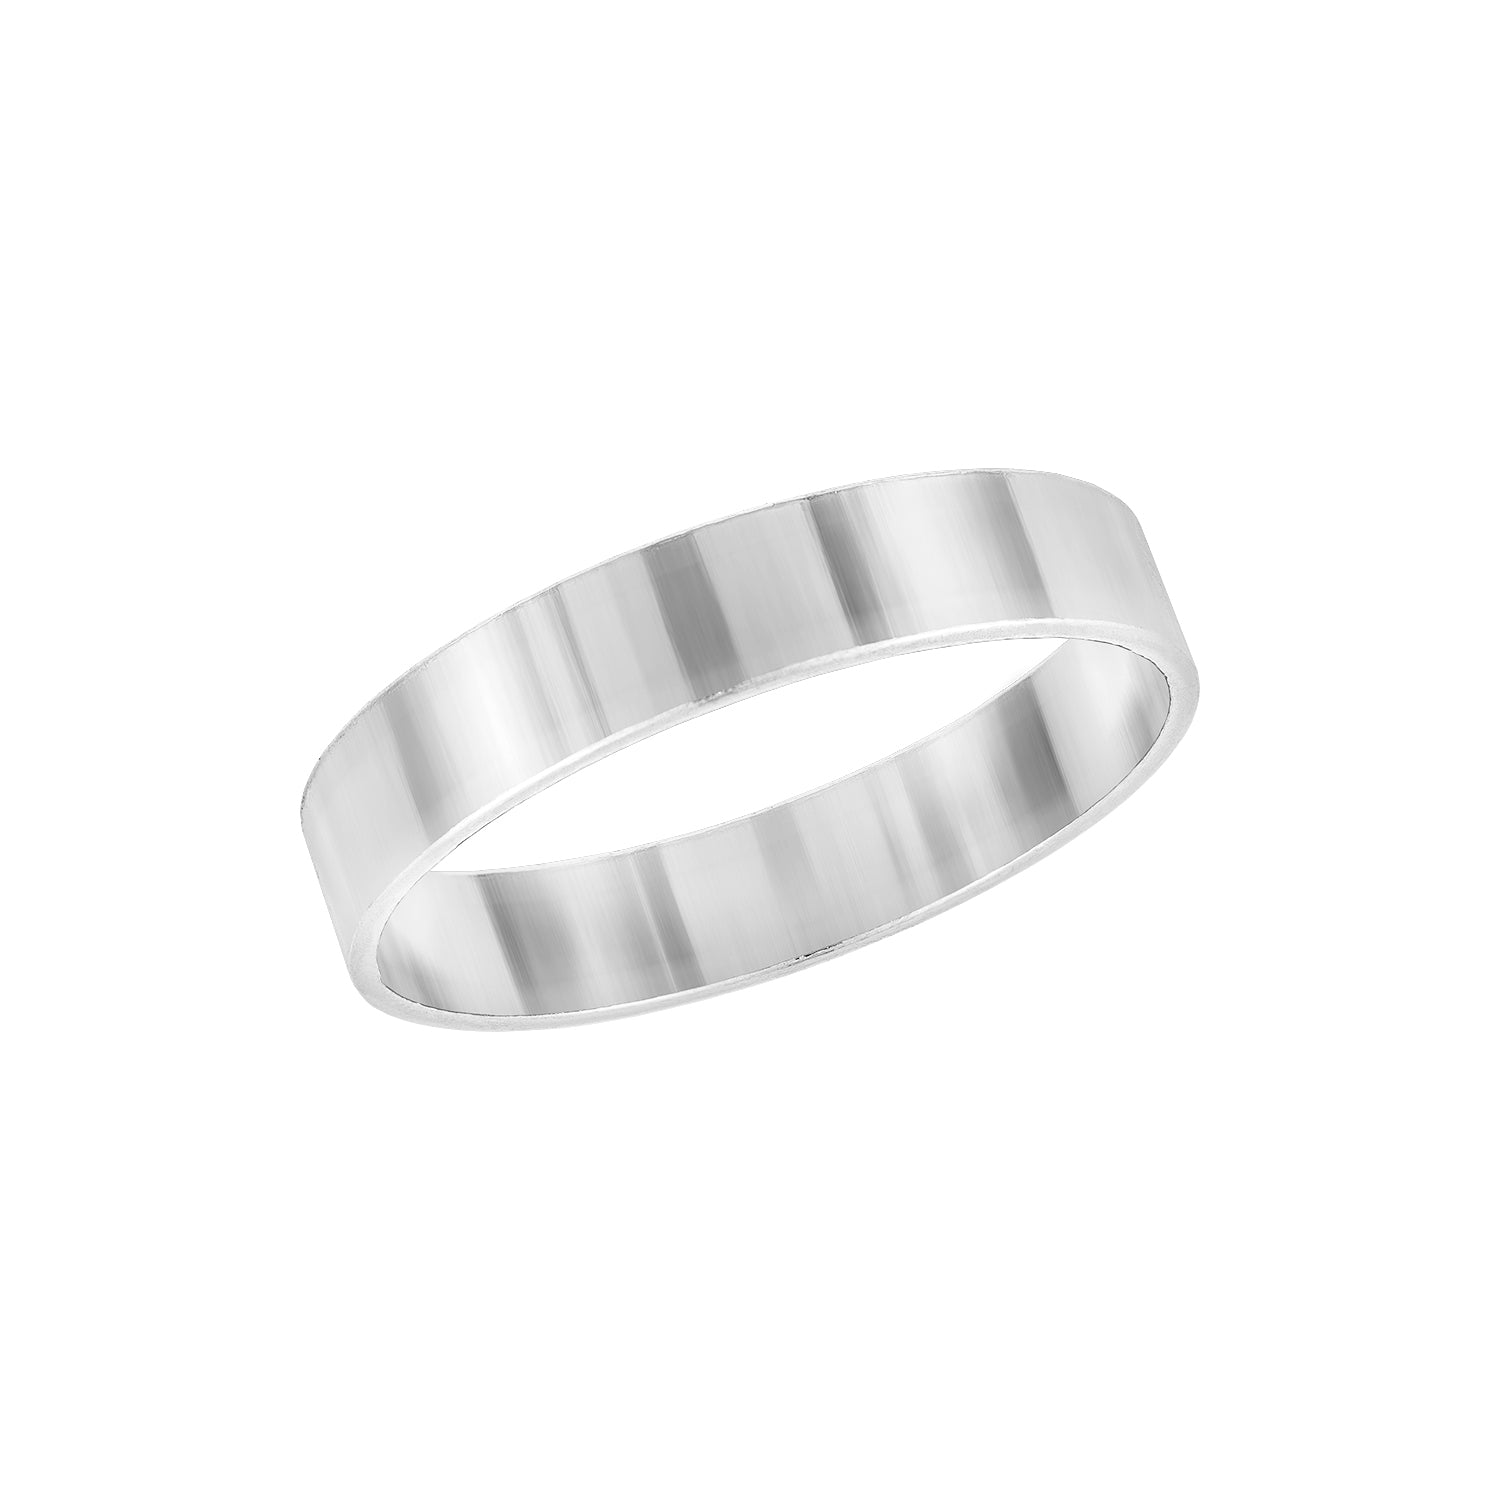 J&CO Jewellery Thick Stacking Ring Silver US 5 US 5